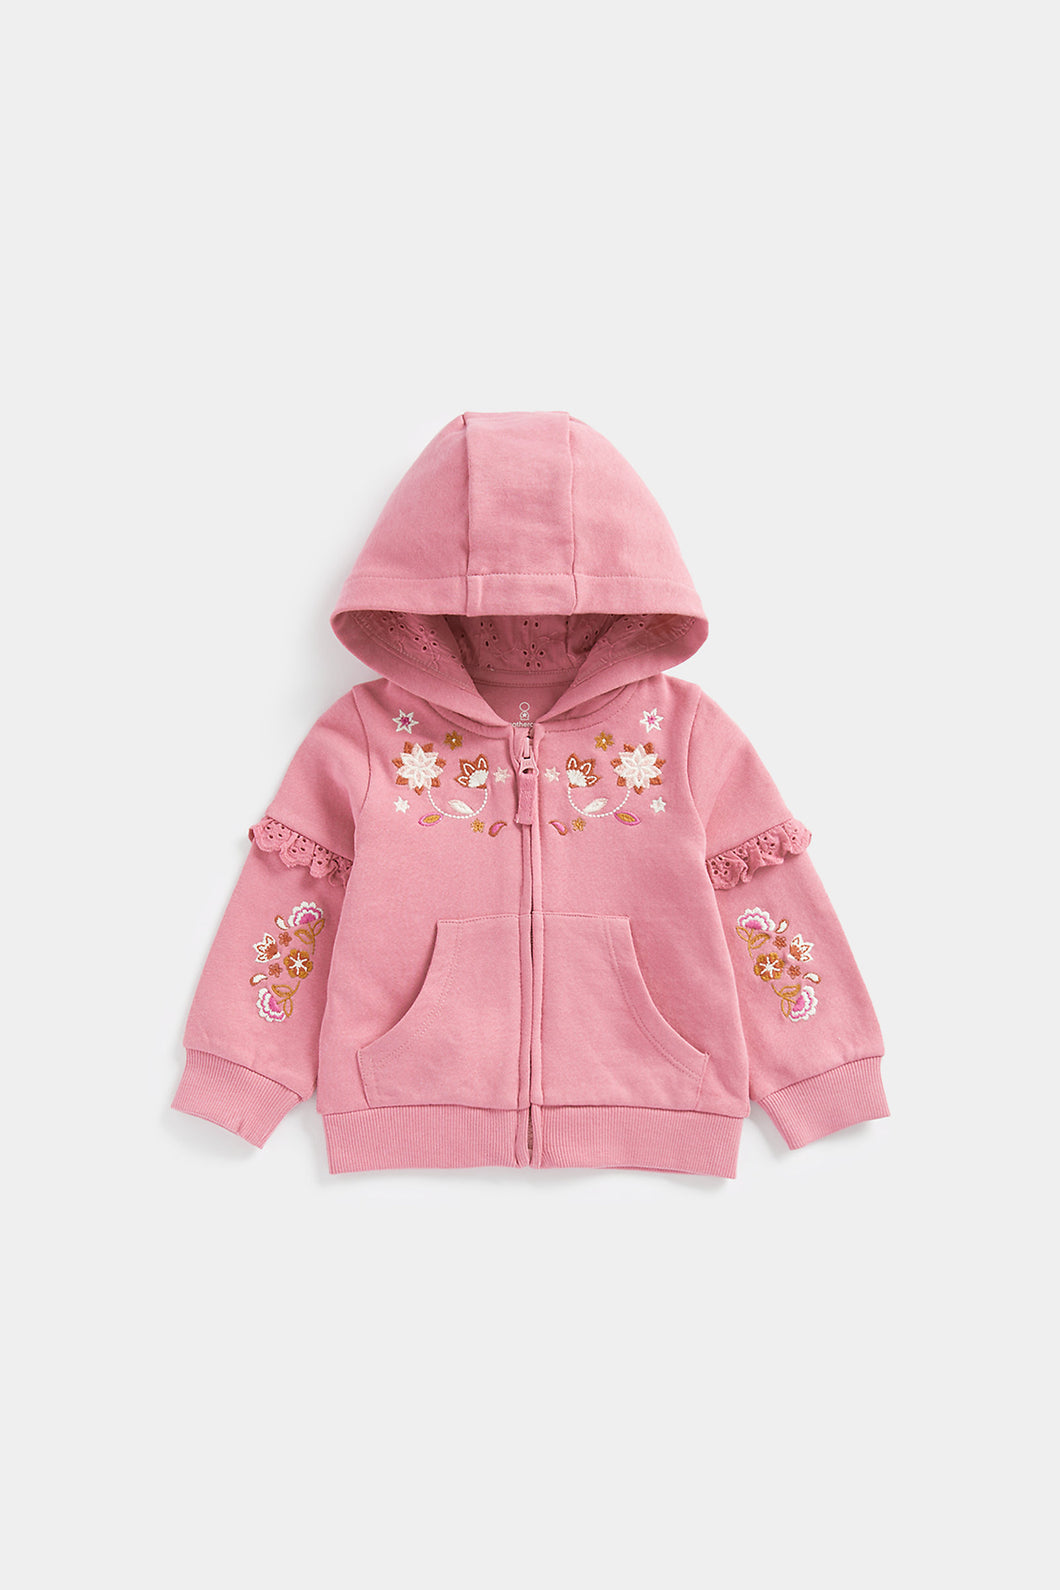 Mothercare Pink Embroidered Hoody